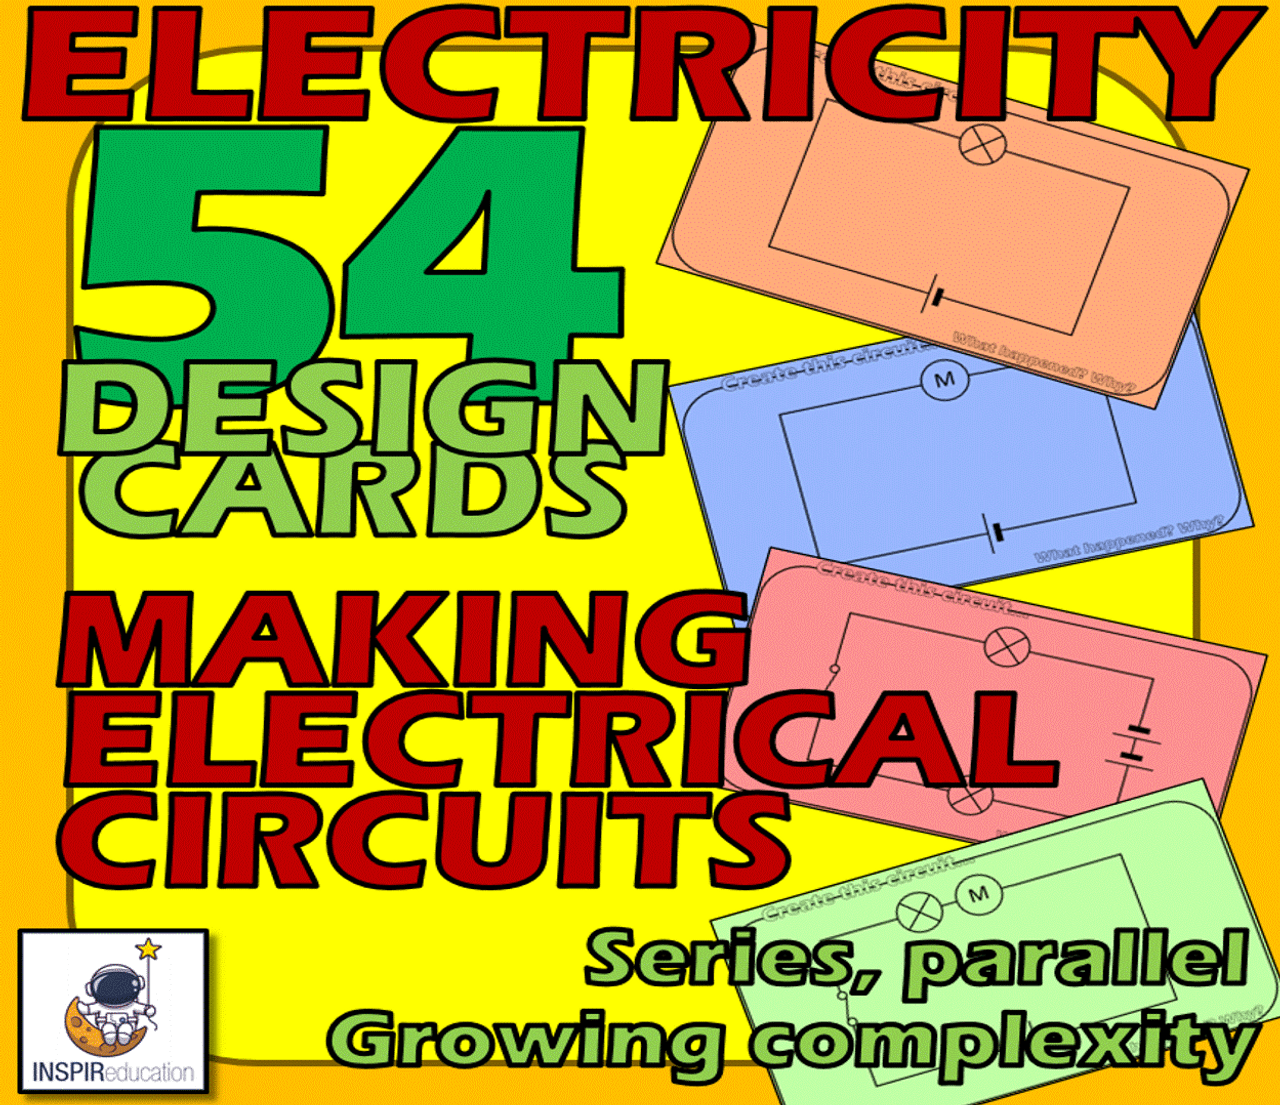 Electrical Circuits - Using Diagrams and components - series, parallel circuits